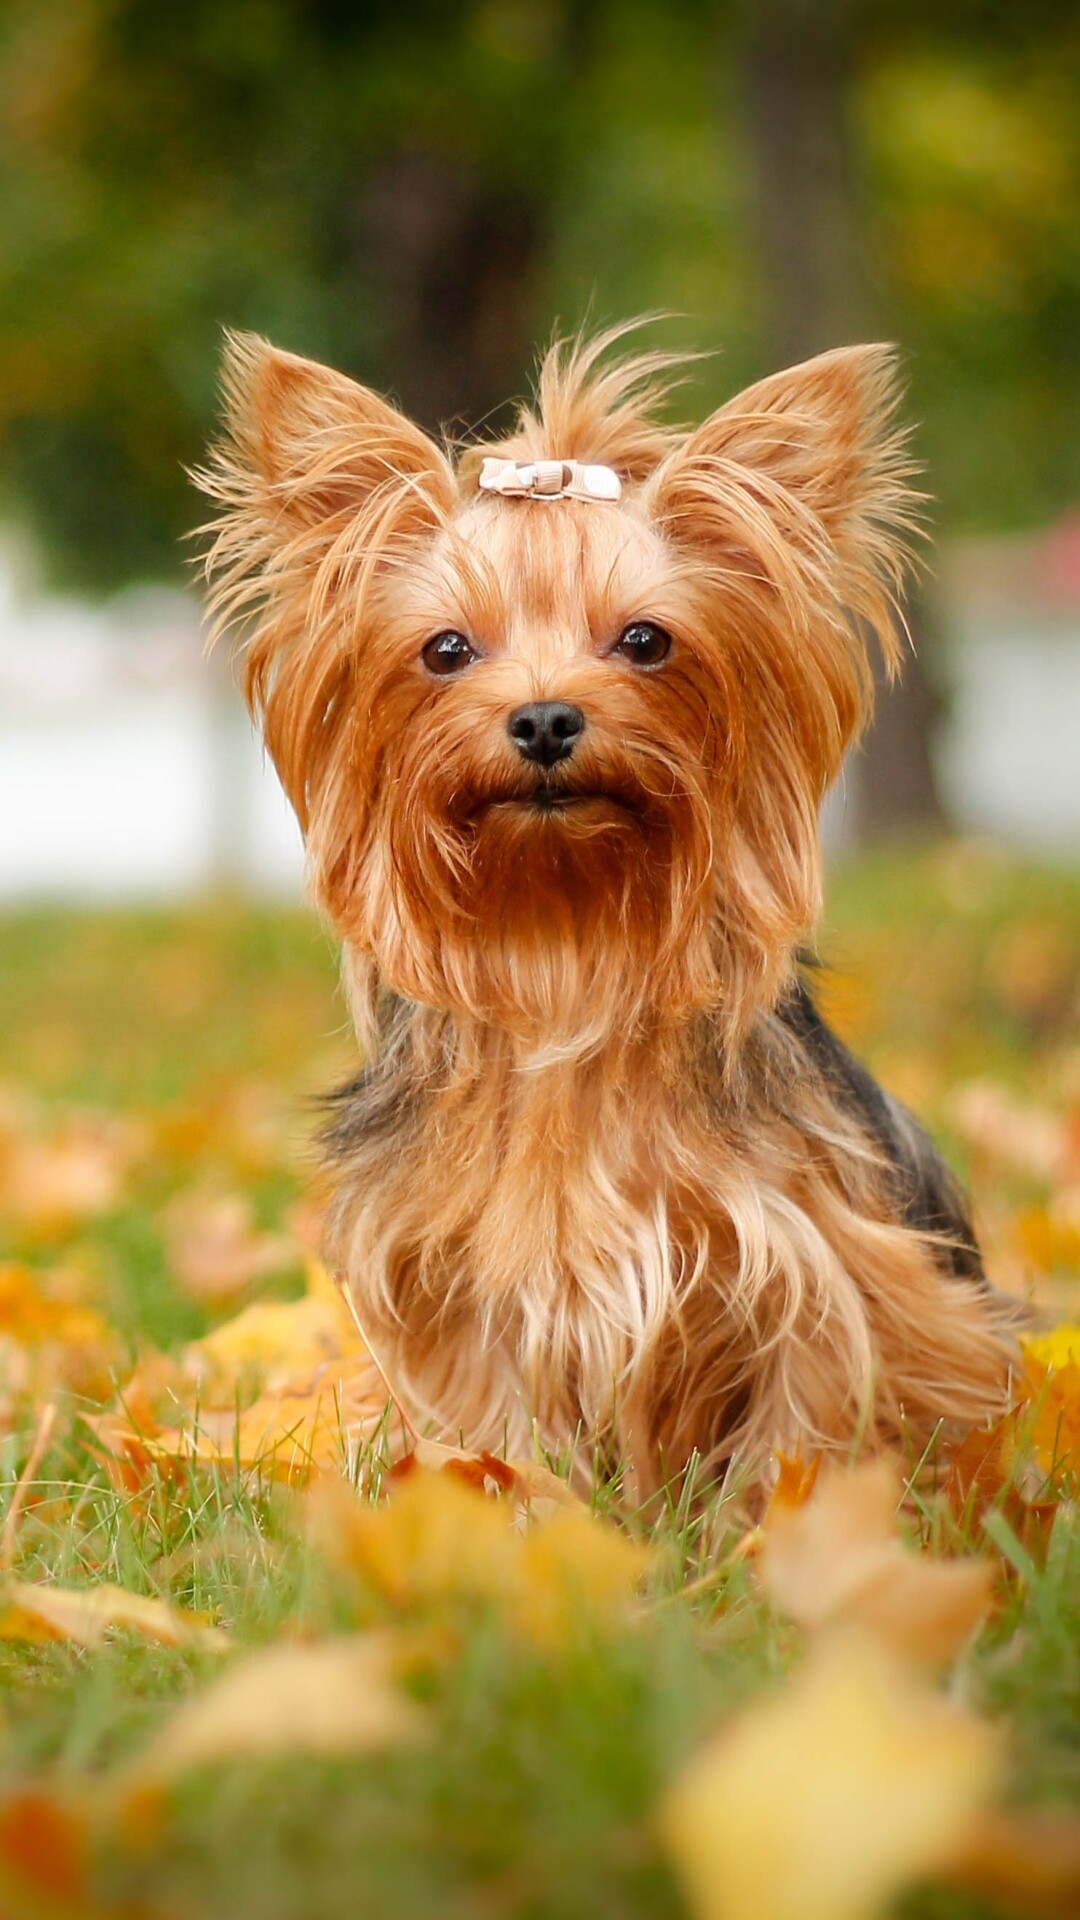 Yorkshire Terrier: Animal, Breed of toy dog developed about the mid-1800s in England. 1080x1920 Full HD Wallpaper.